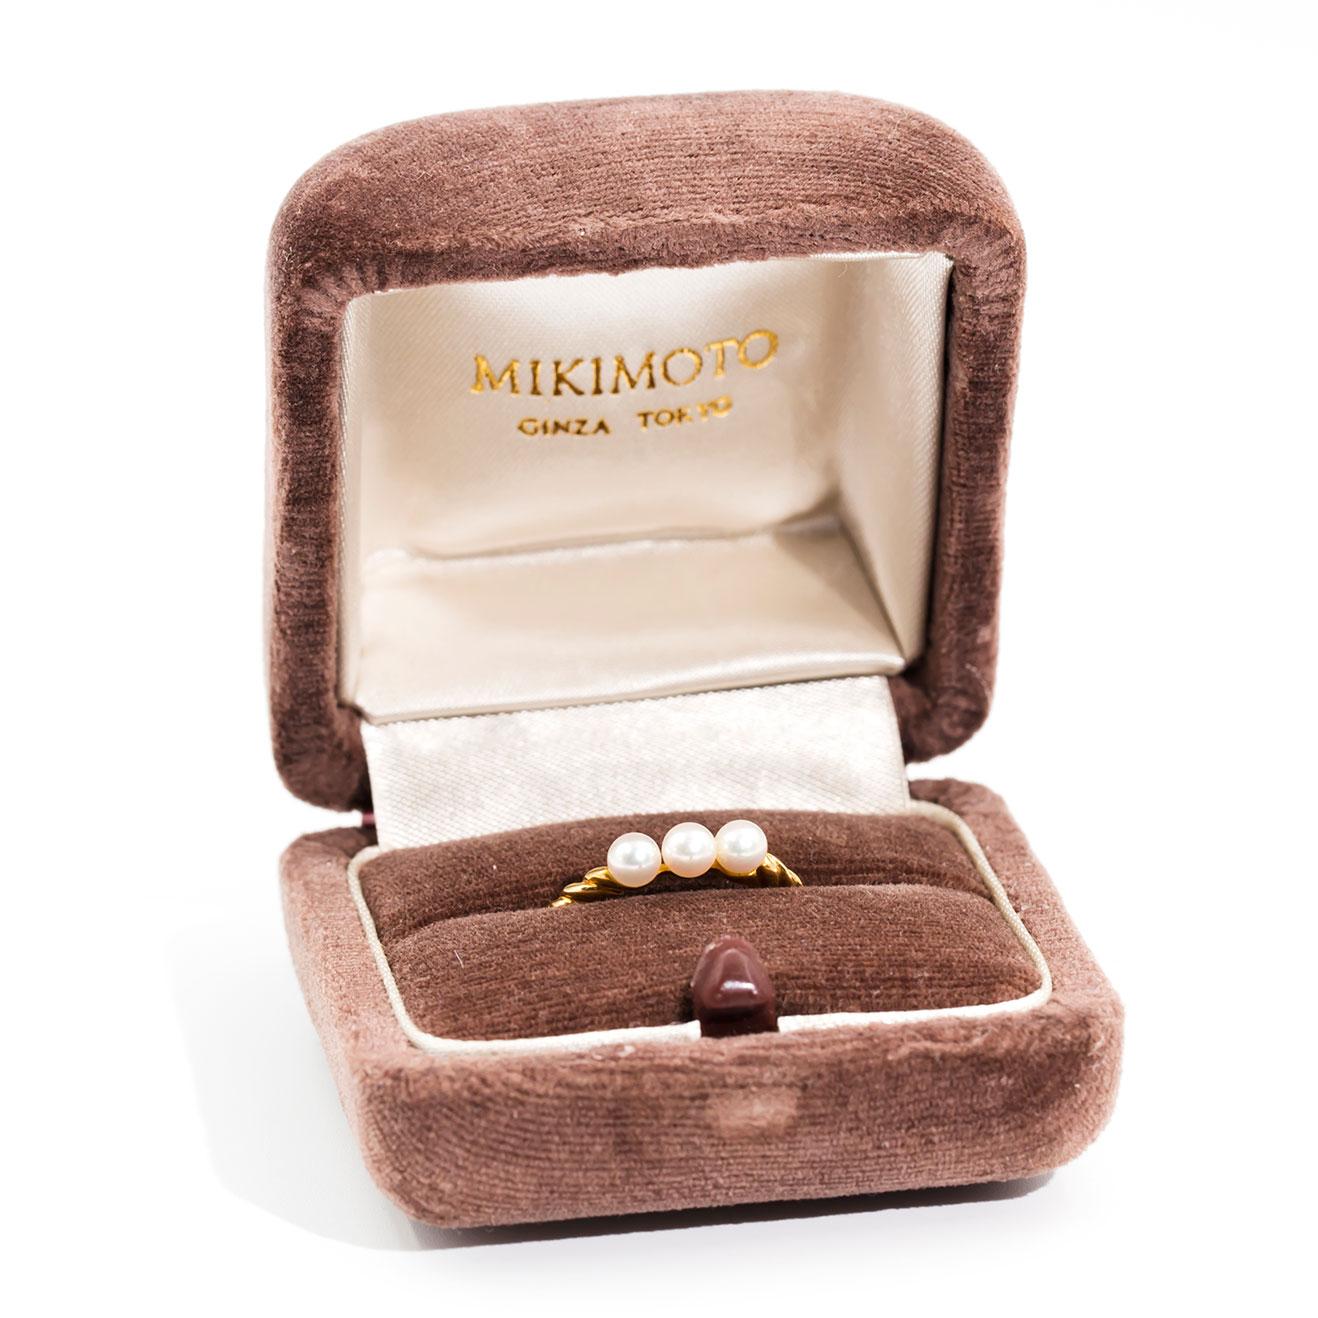 Women's Mikimoto Cultured Pearl 18 Carat Yellow Gold Ring with Original Box and Papers